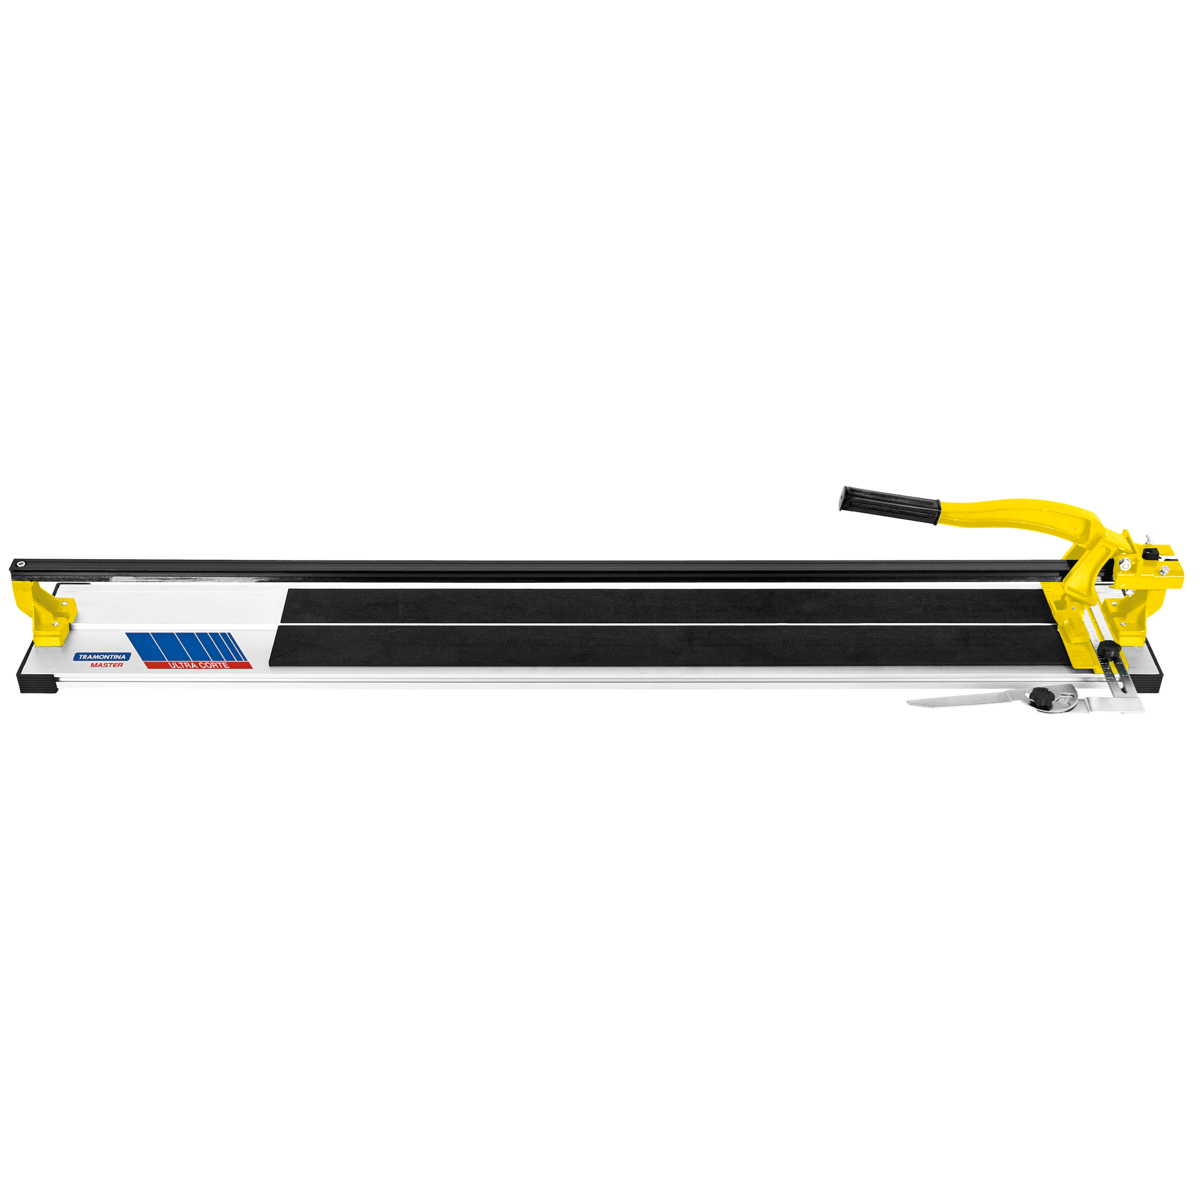 Tramontina 1300mm Floor and Tile Cutter